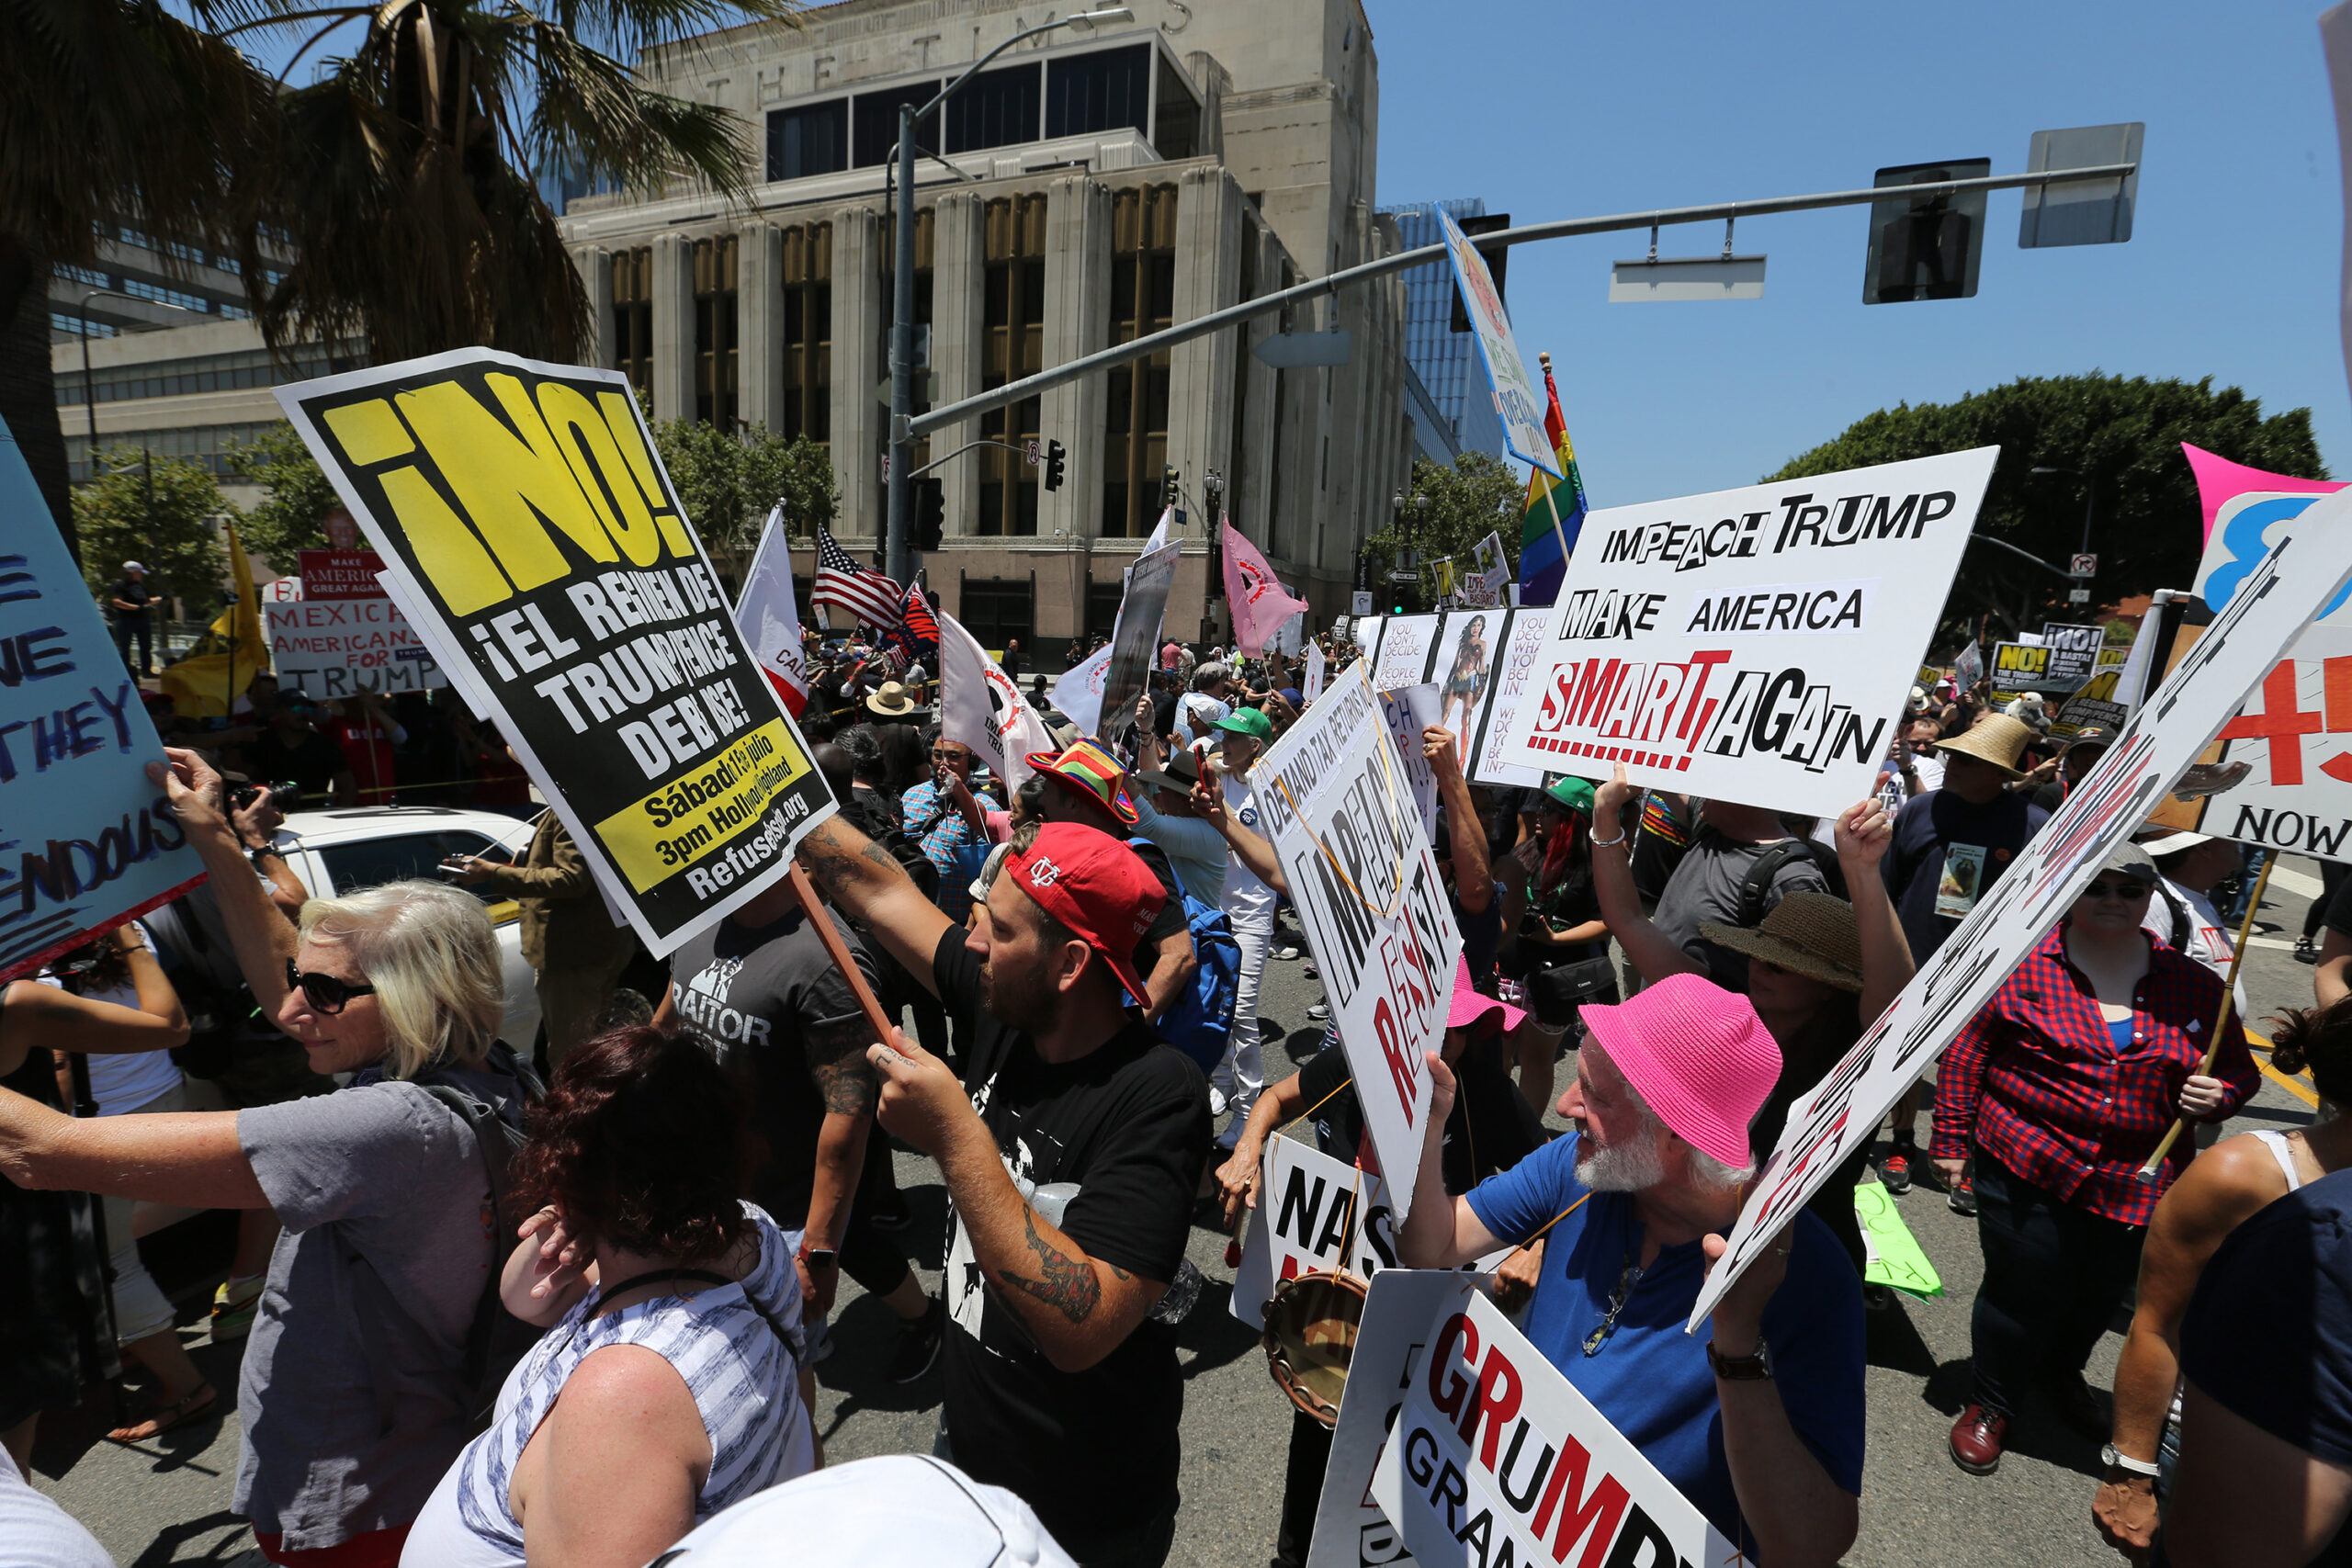 Protesters march past President Donald Trump supporters on Sunday, July 2, 2017 during an impeachment march from Pershing Square to the front of the Federal Courthouse in downtown Los Angeles, Calif. (Allen J. Schaben/Los Angeles Times/TNS)